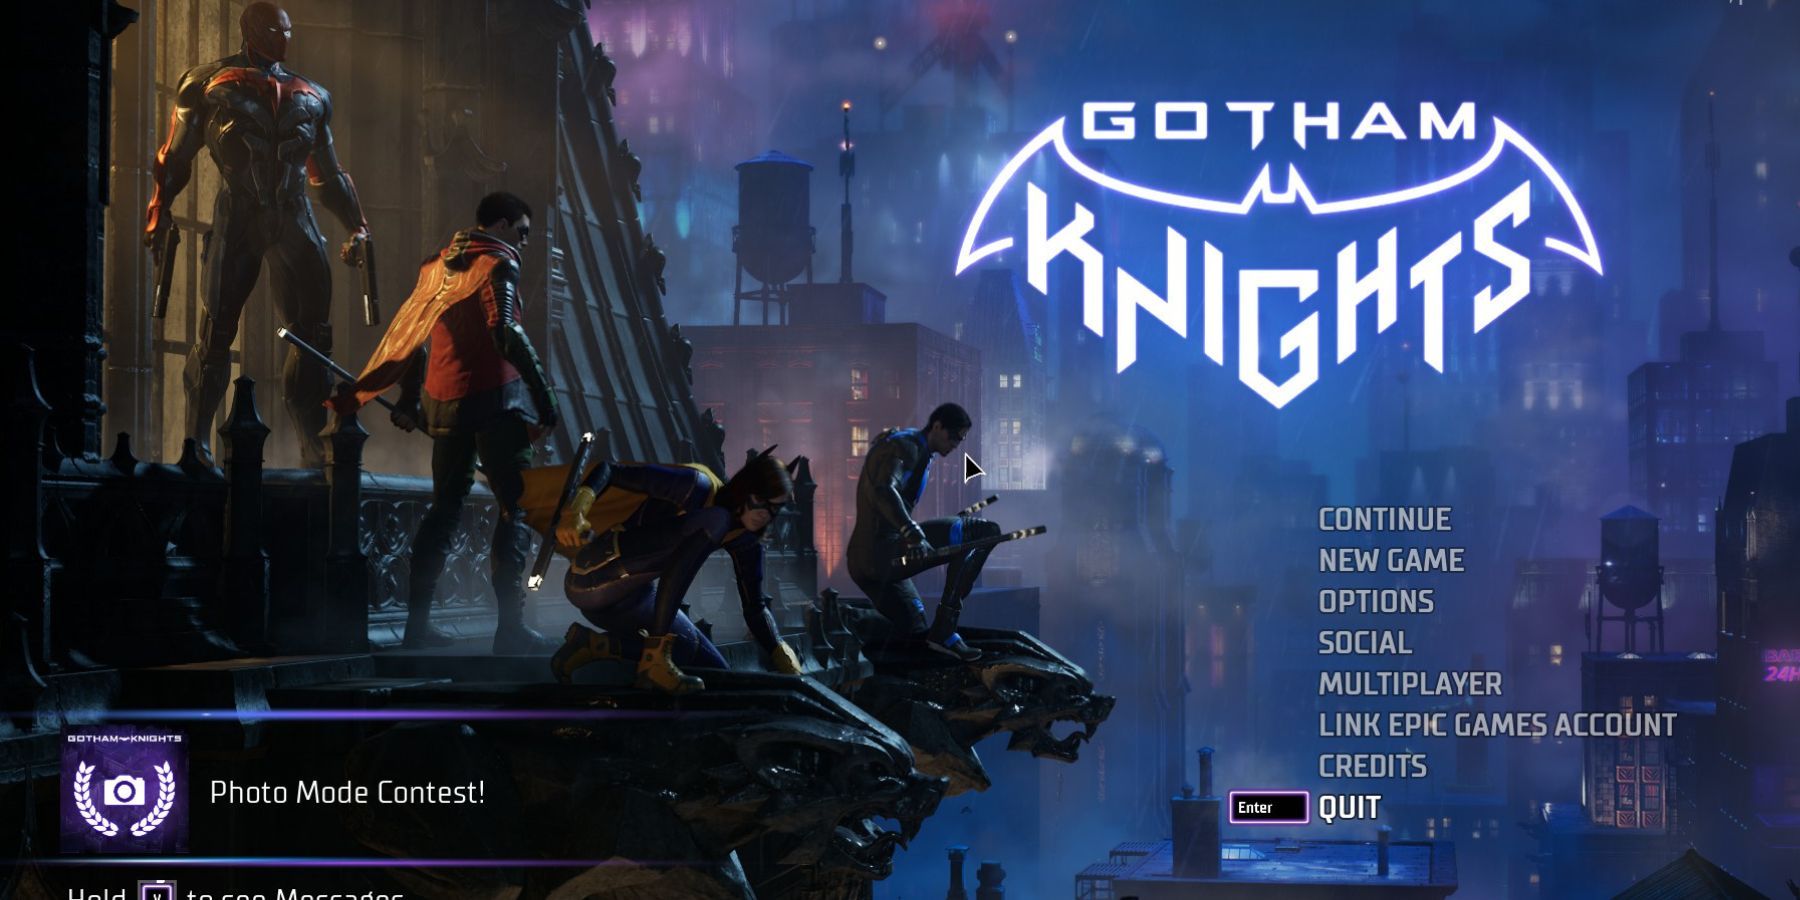 What to know about Gotham Knights crossplay and multiplayer - Polygon